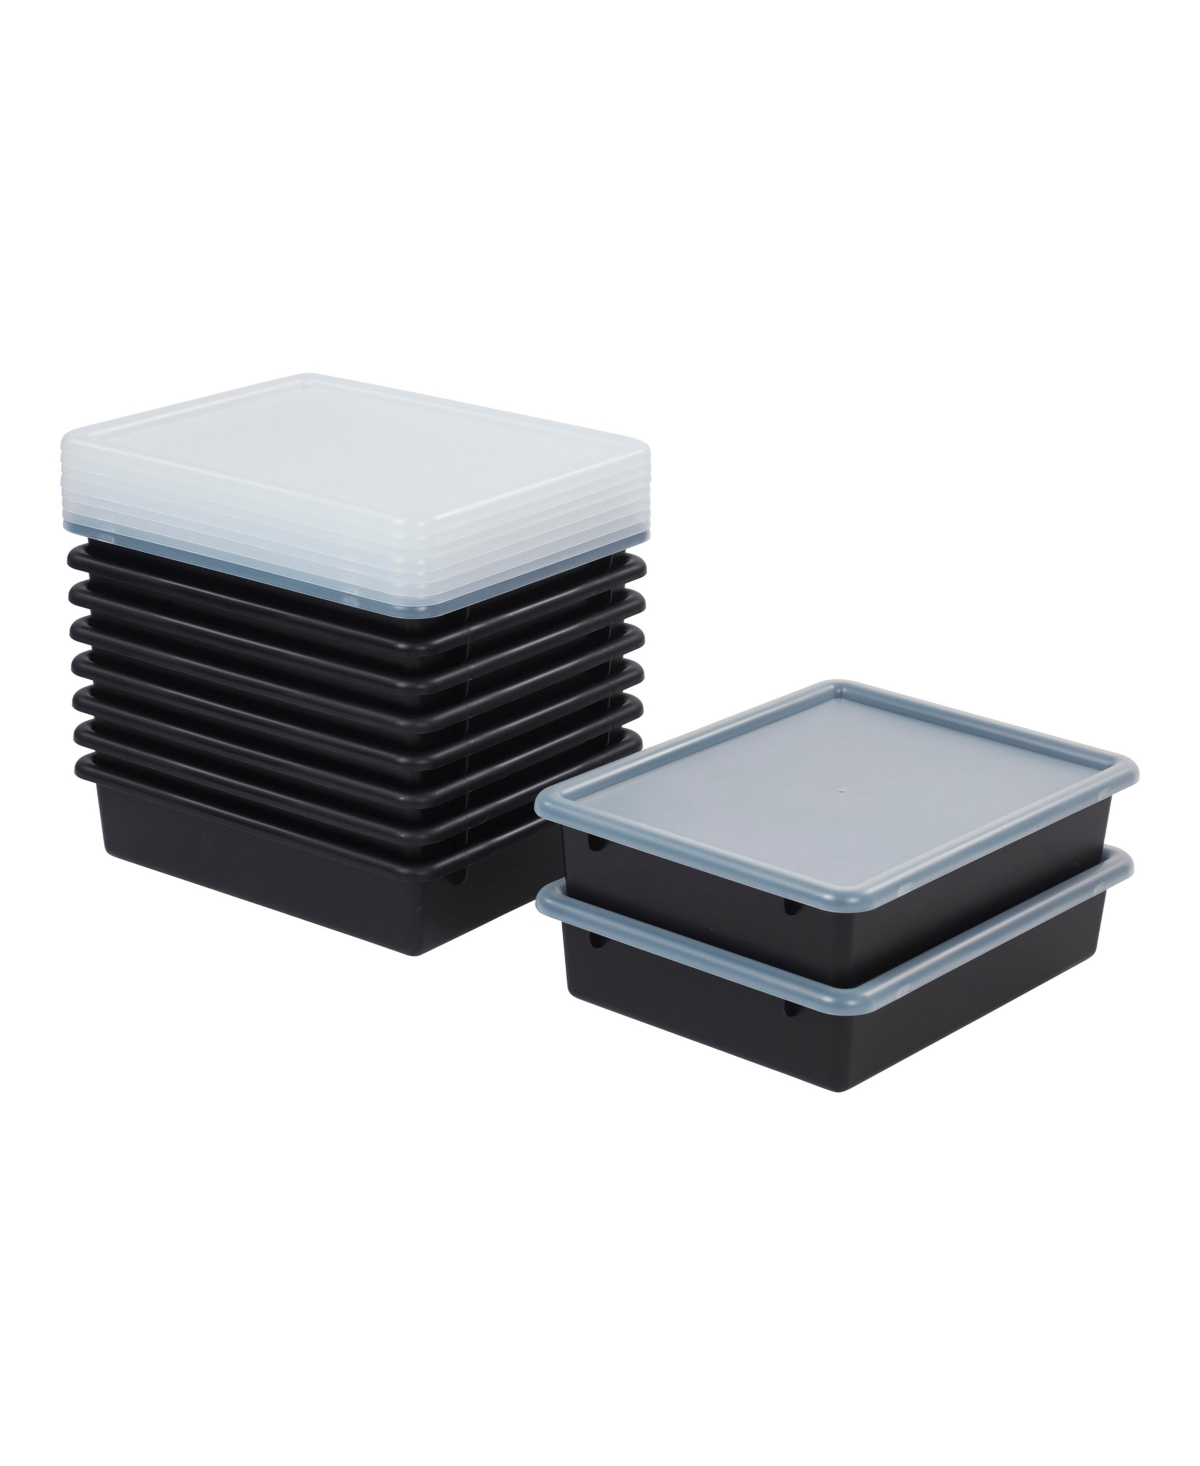 Letter Size Tray with Lid, Black, 10-Piece - Black